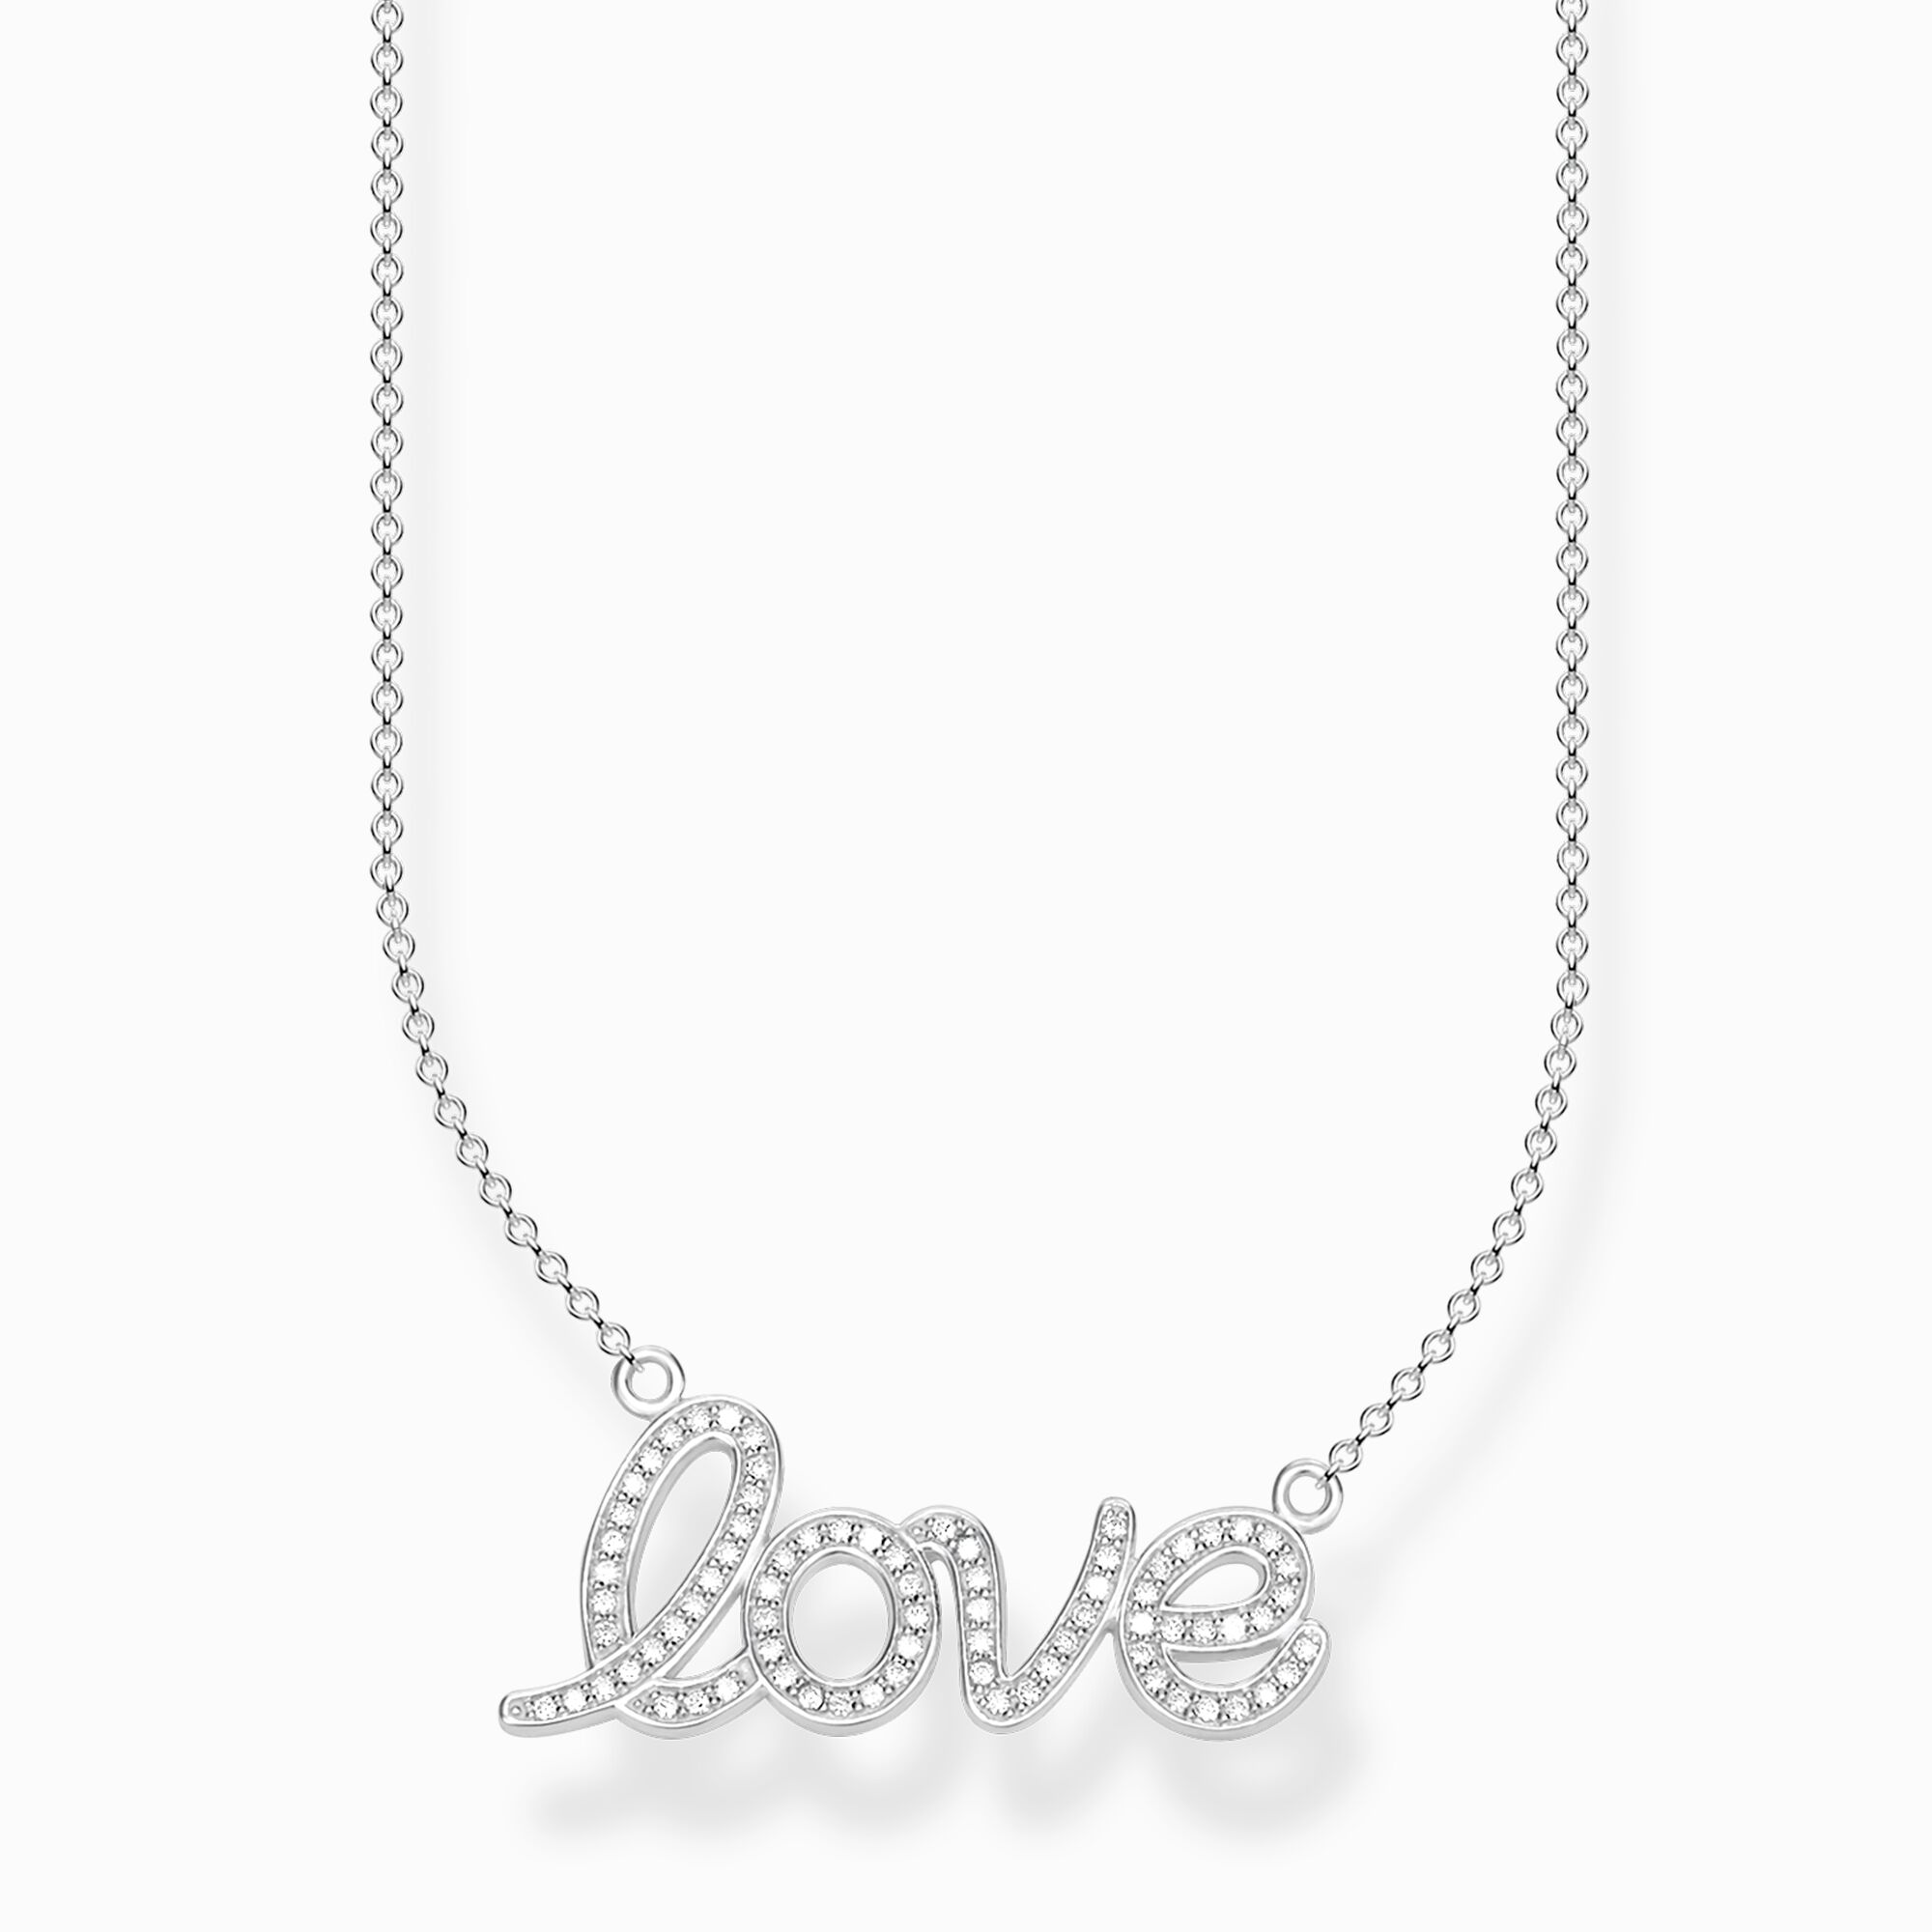 Necklace love from the  collection in the THOMAS SABO online store